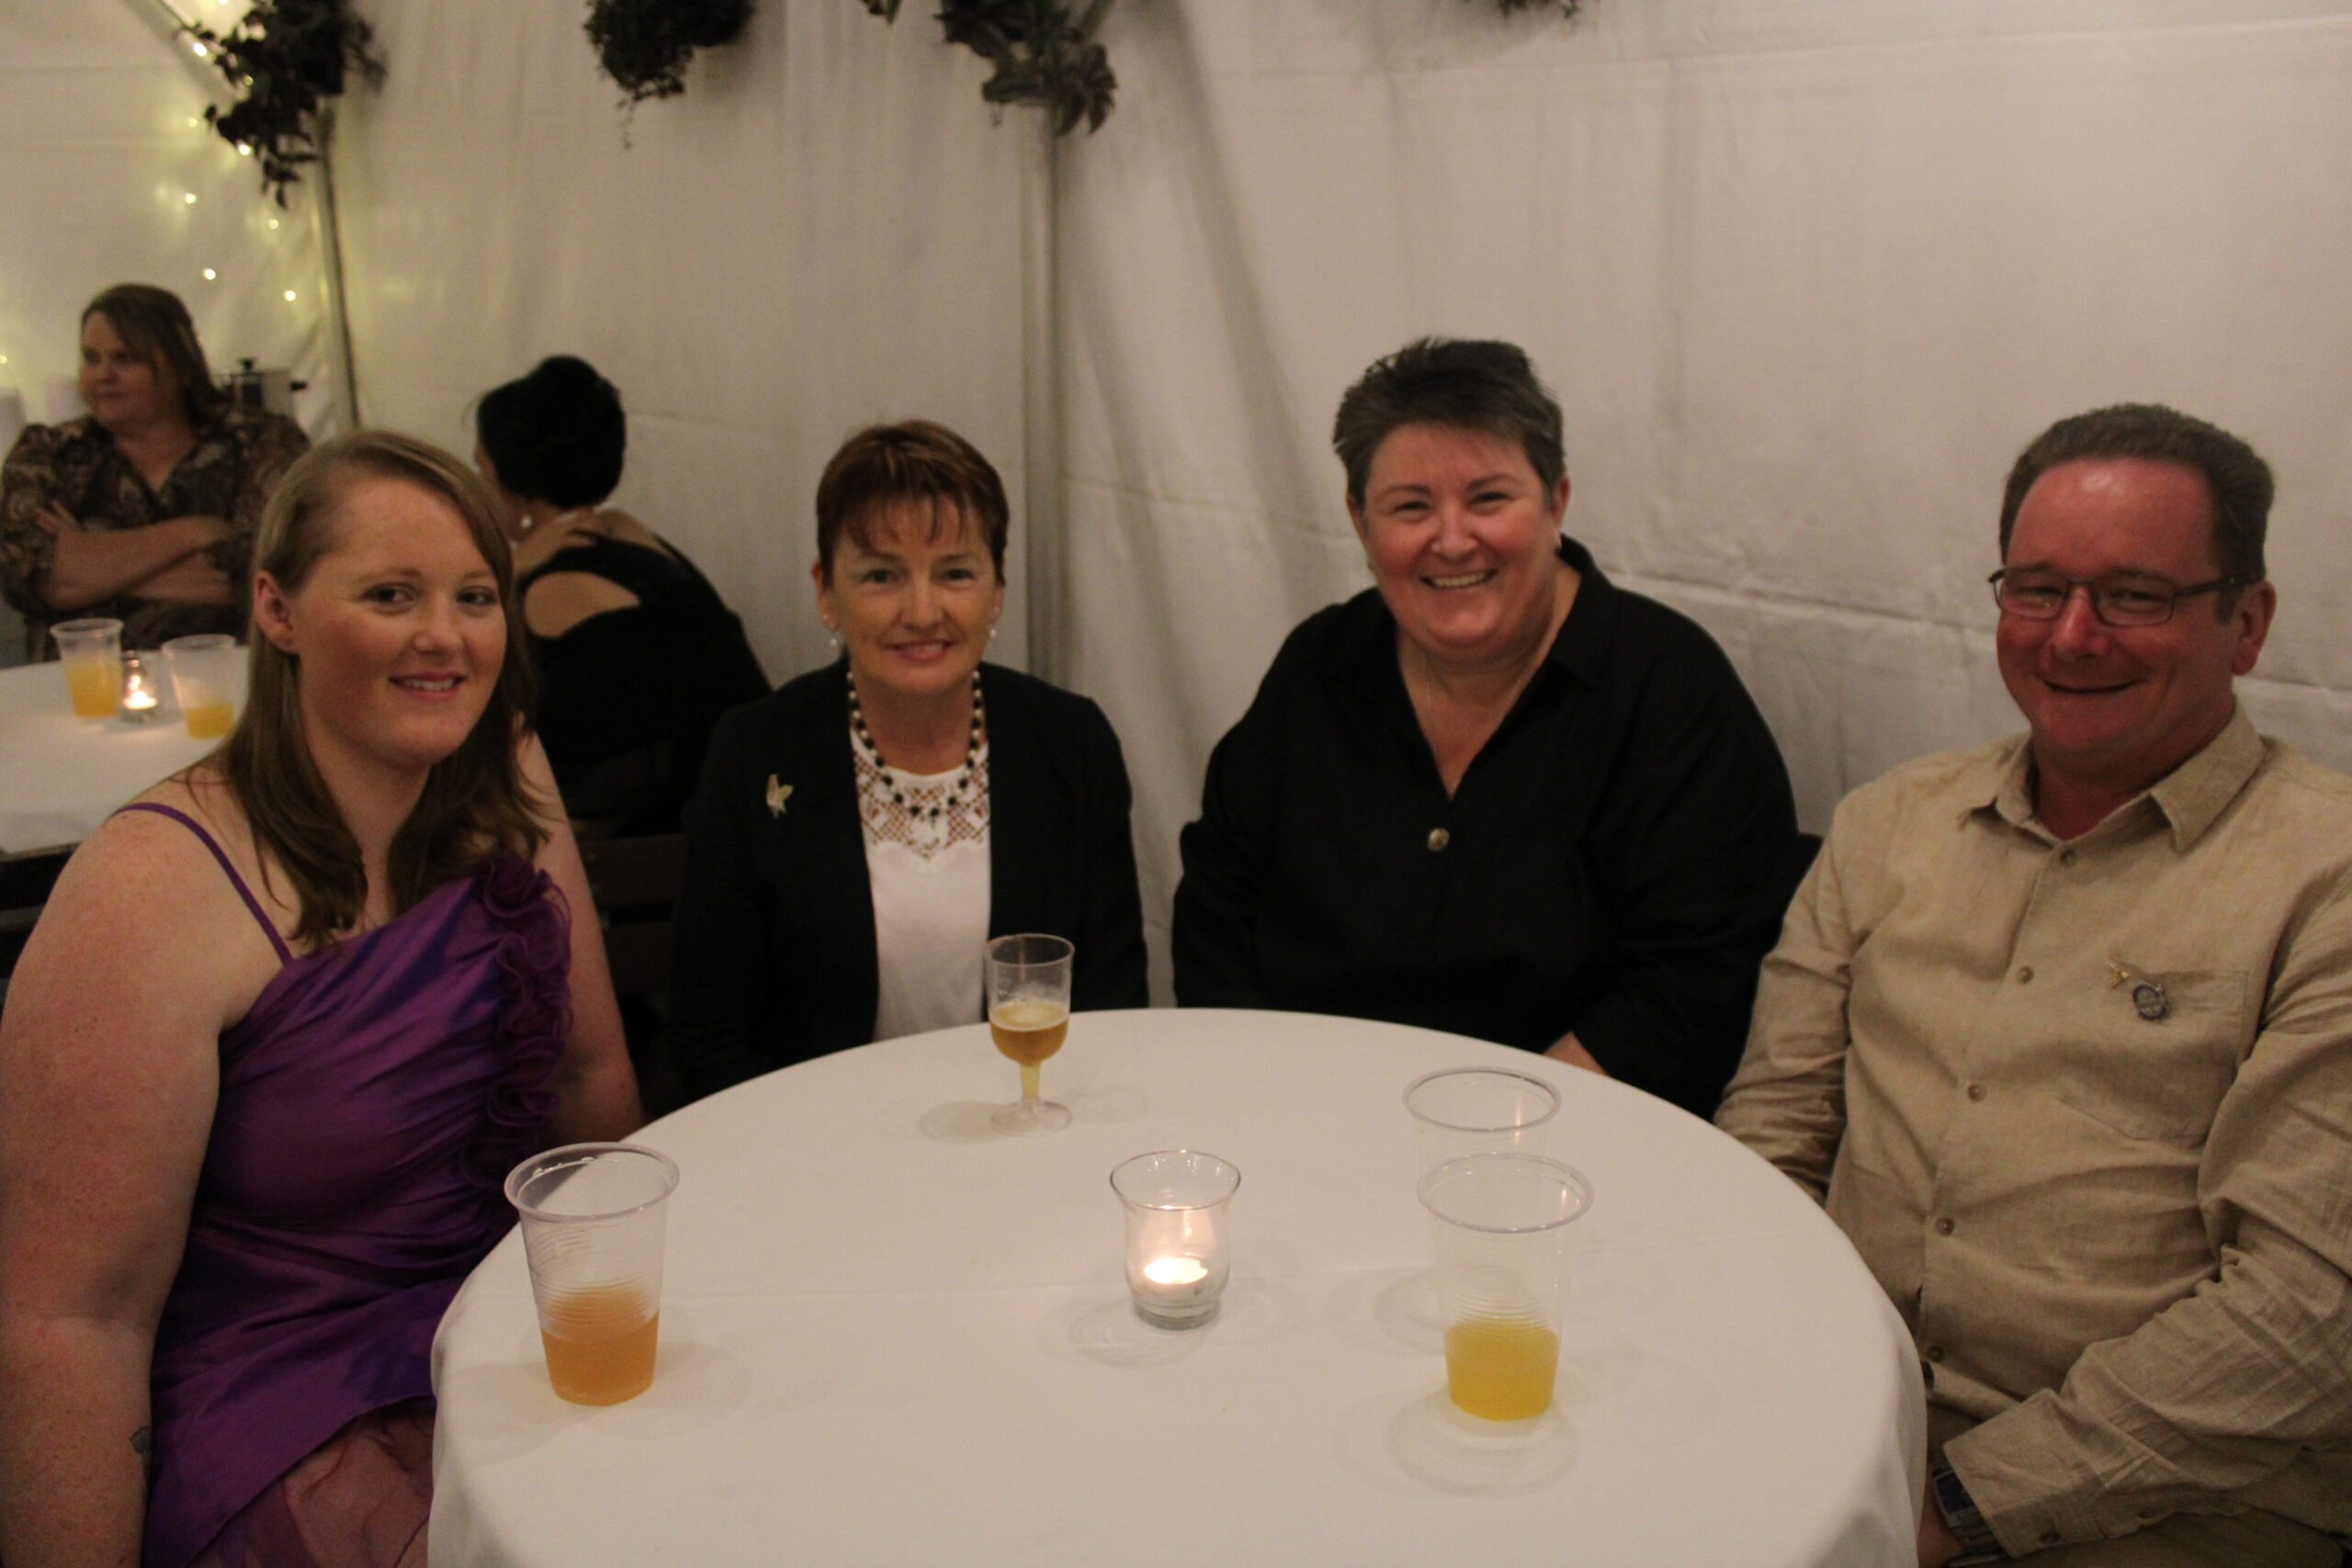 Sarah Little, Trish Lawty, Janet Pope and Ronald Hardy.